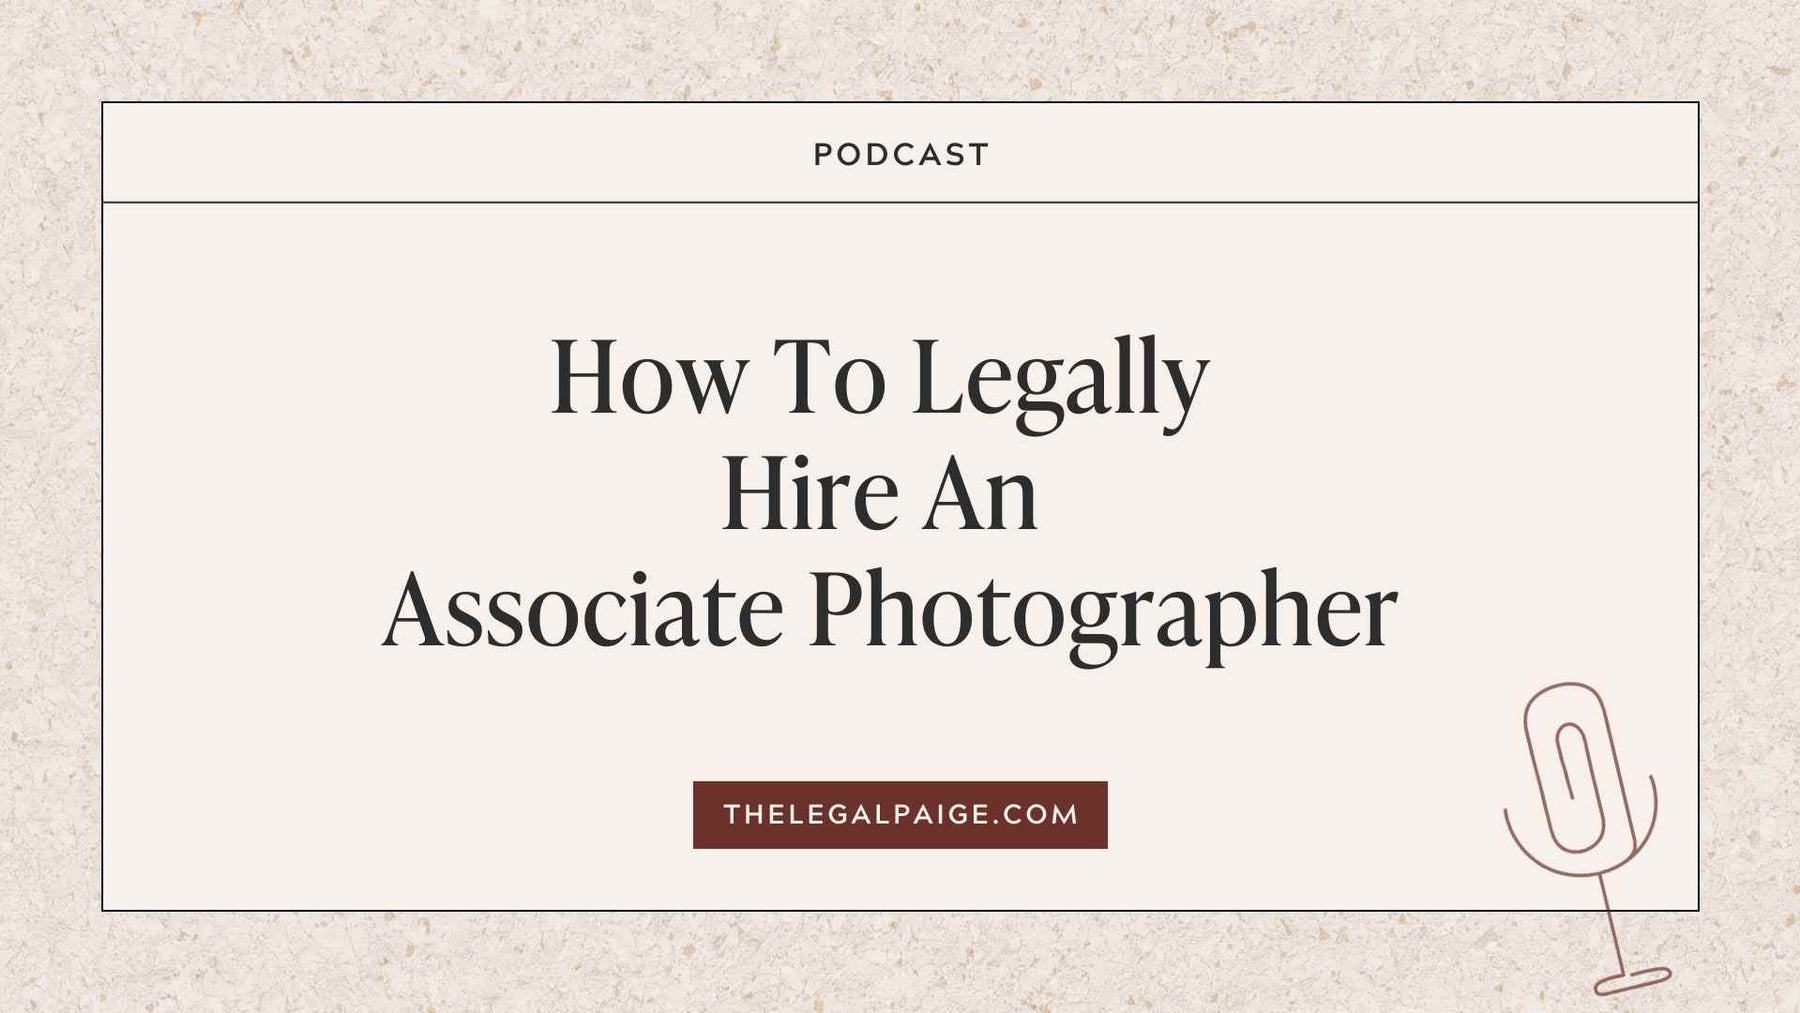 Episode 98: How To Legally Hire An Associate Photographer